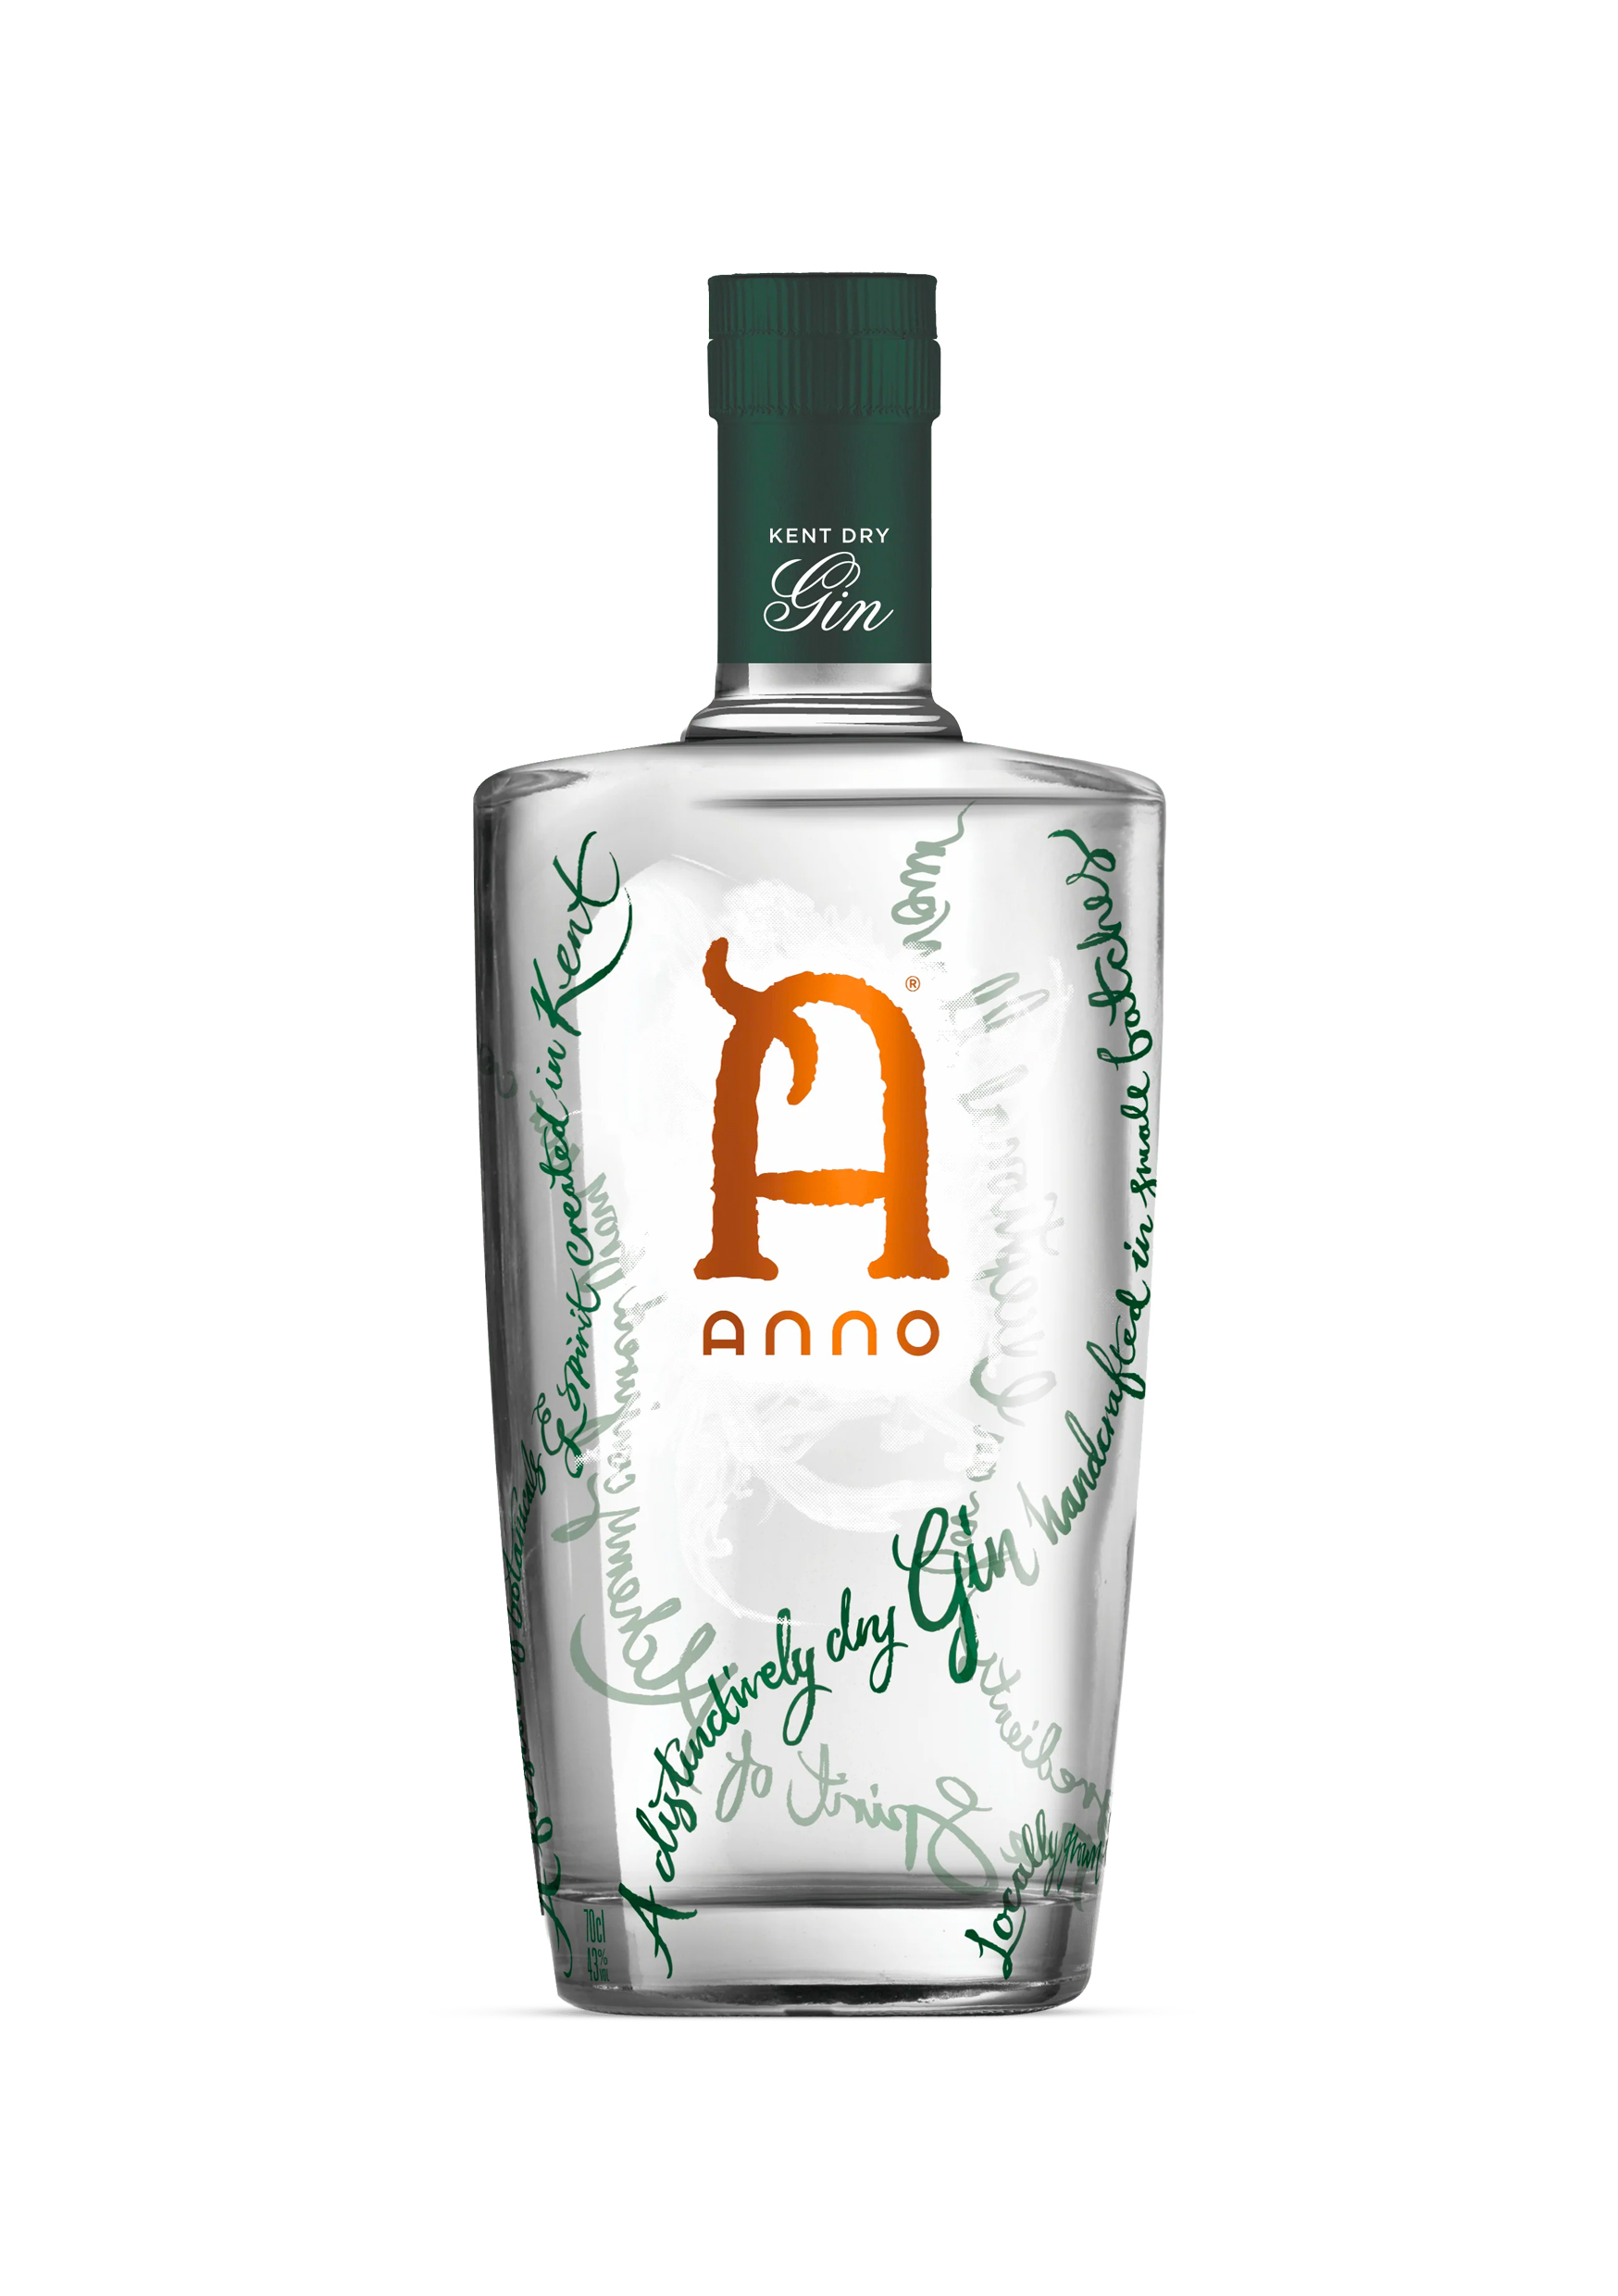 Anno Kent Dry Gin - 70cl